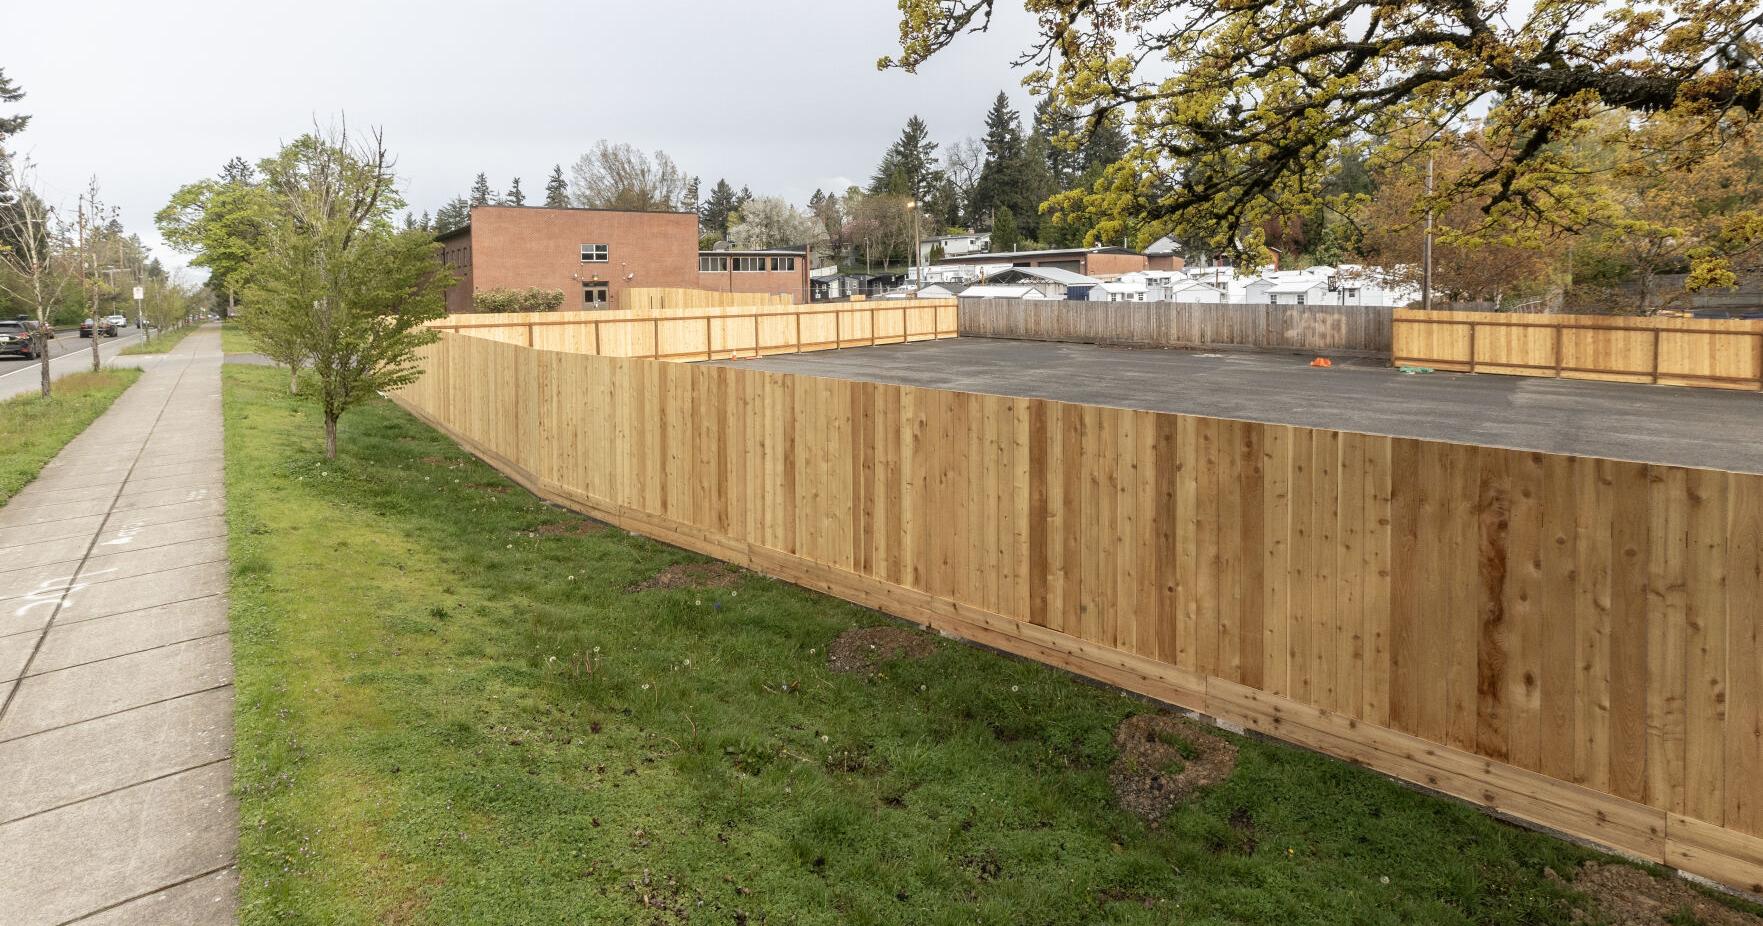 New fence, Sears Armory part of expanded Multnomah Safe Rest Village